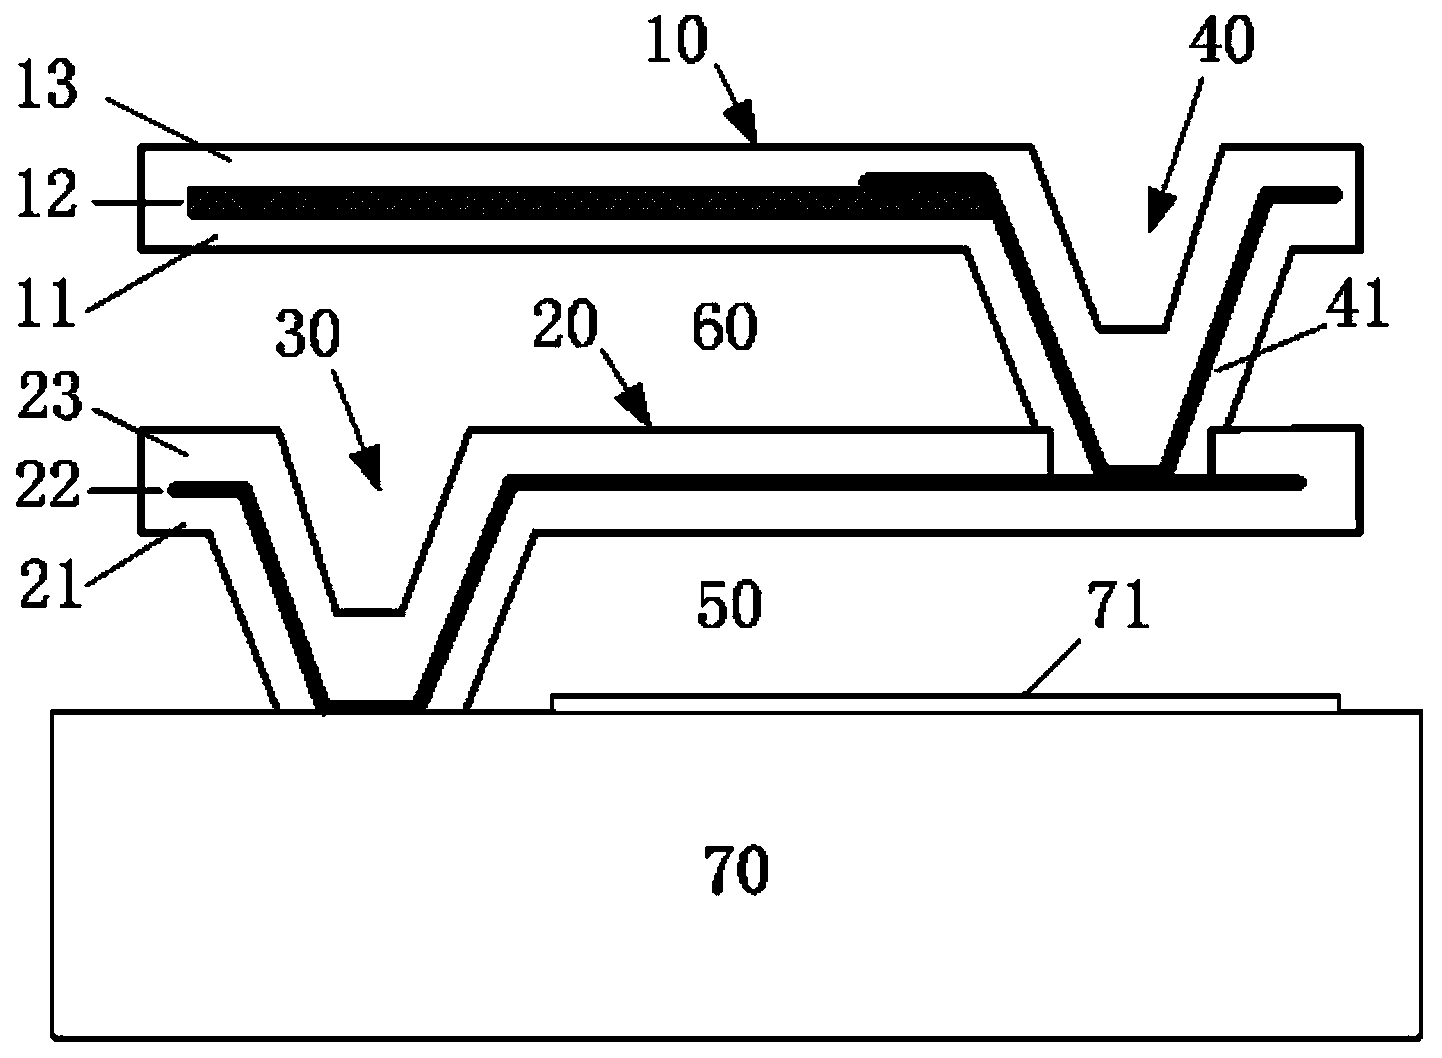 Non-refrigeration infrared focal plane array detector of double-layer structure